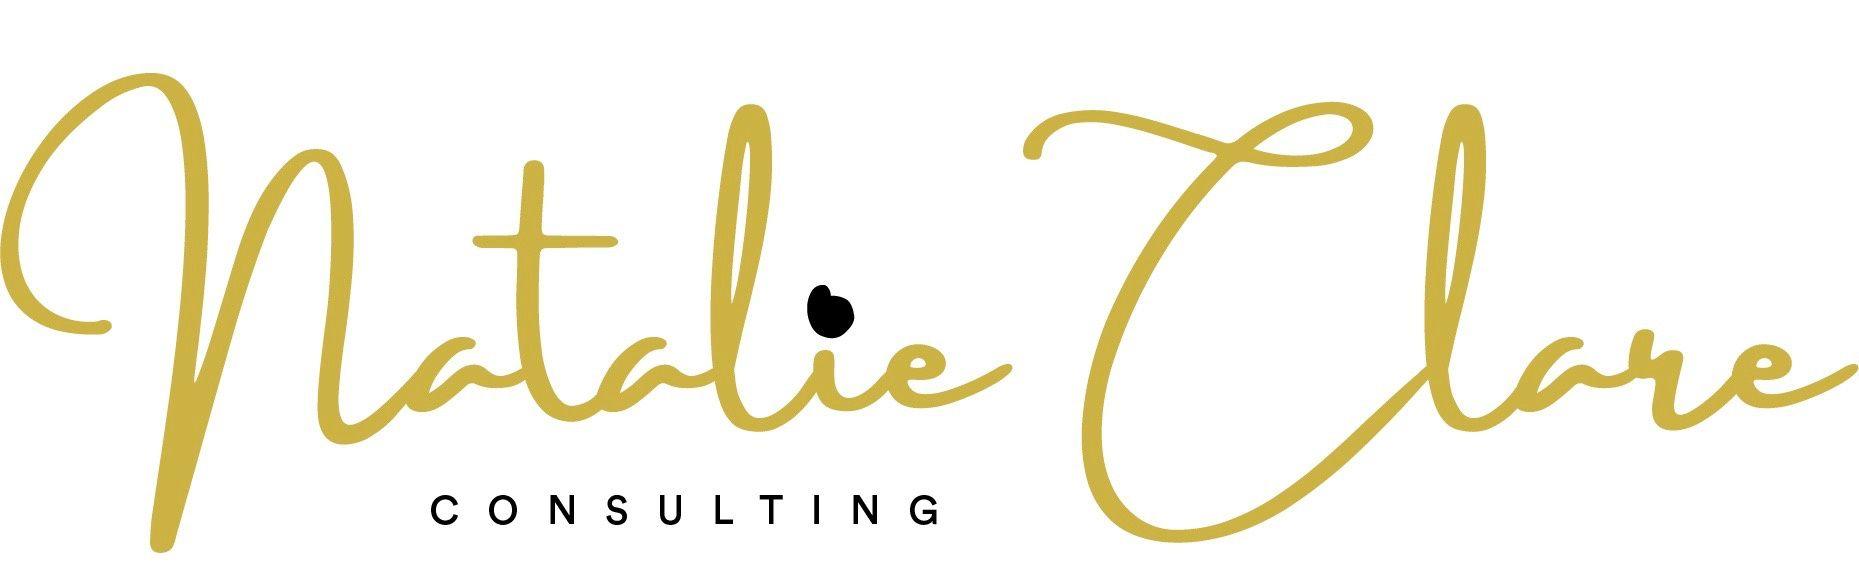 Natalie Logo - Natalie Clare Consulting | Home Page